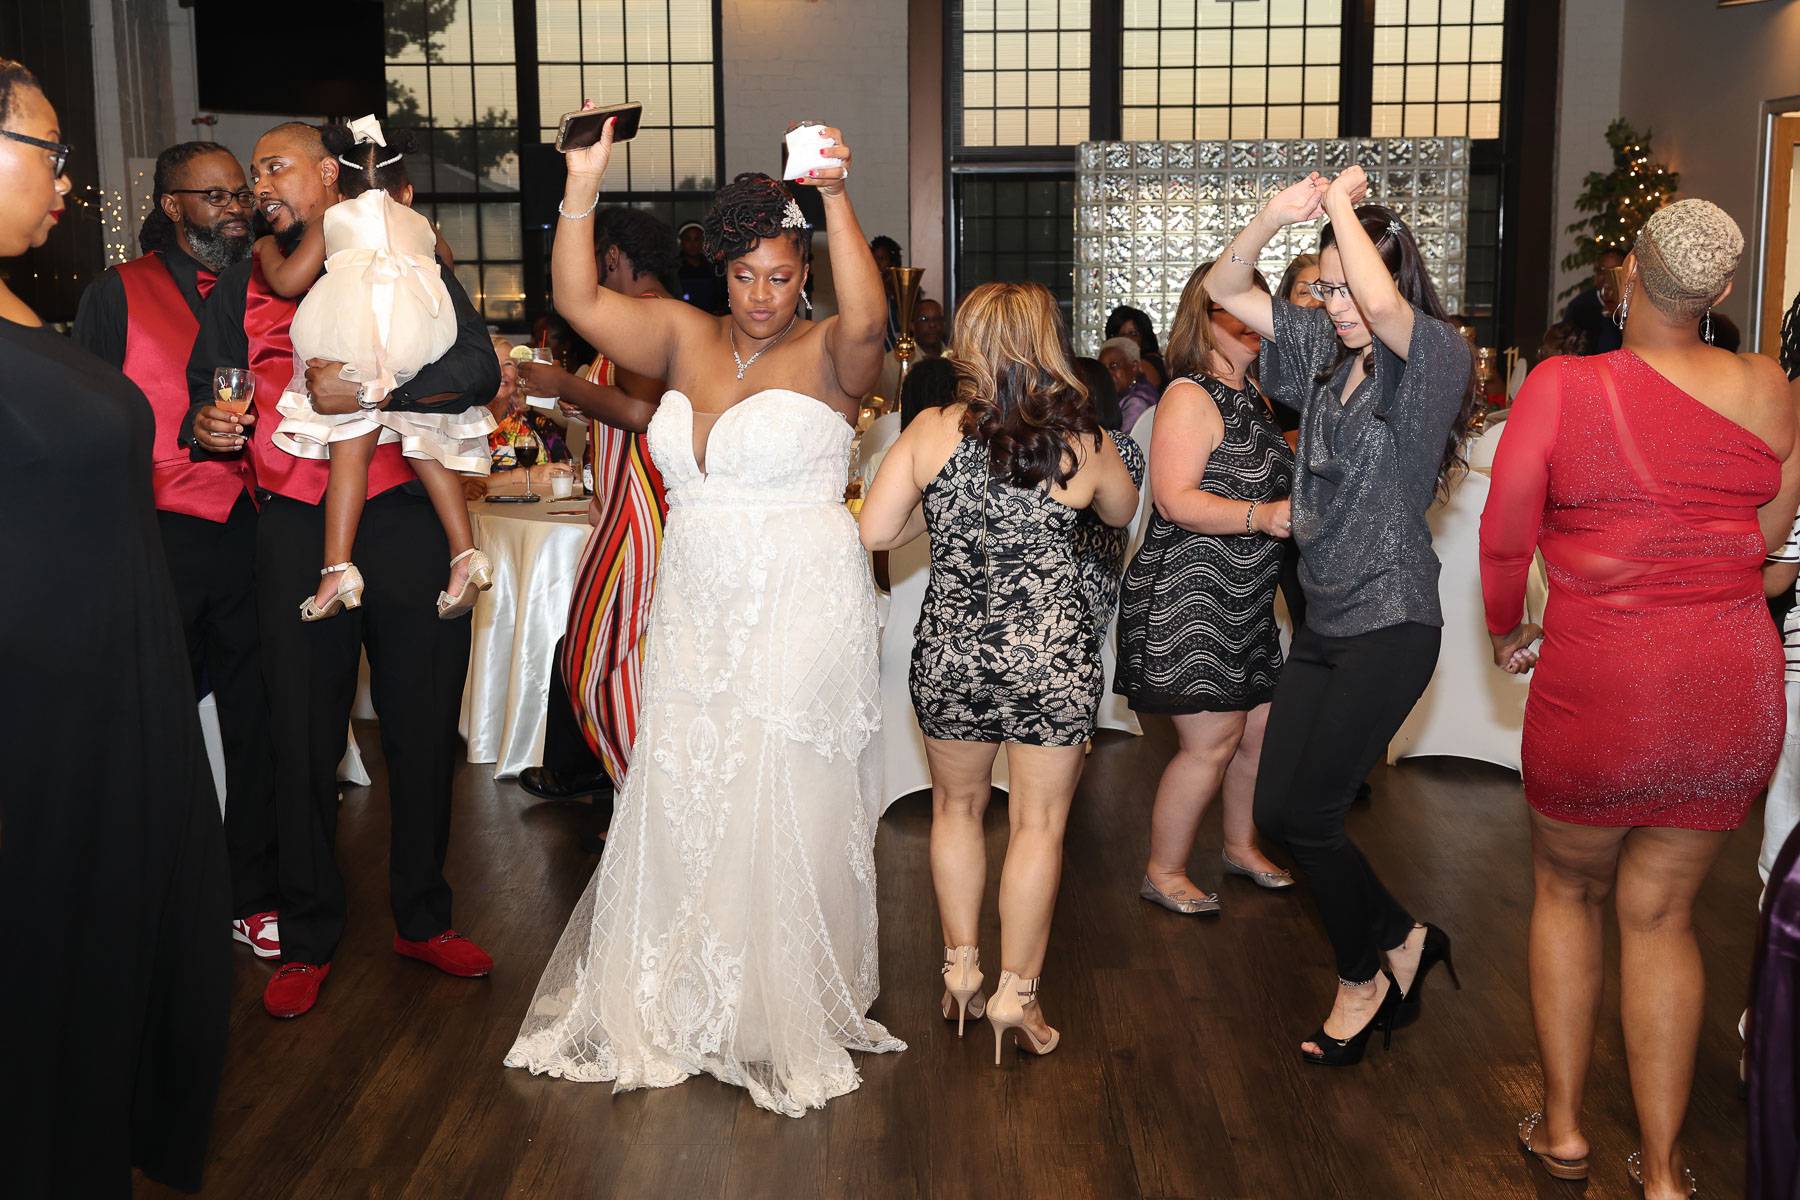 The bride dancing to her party